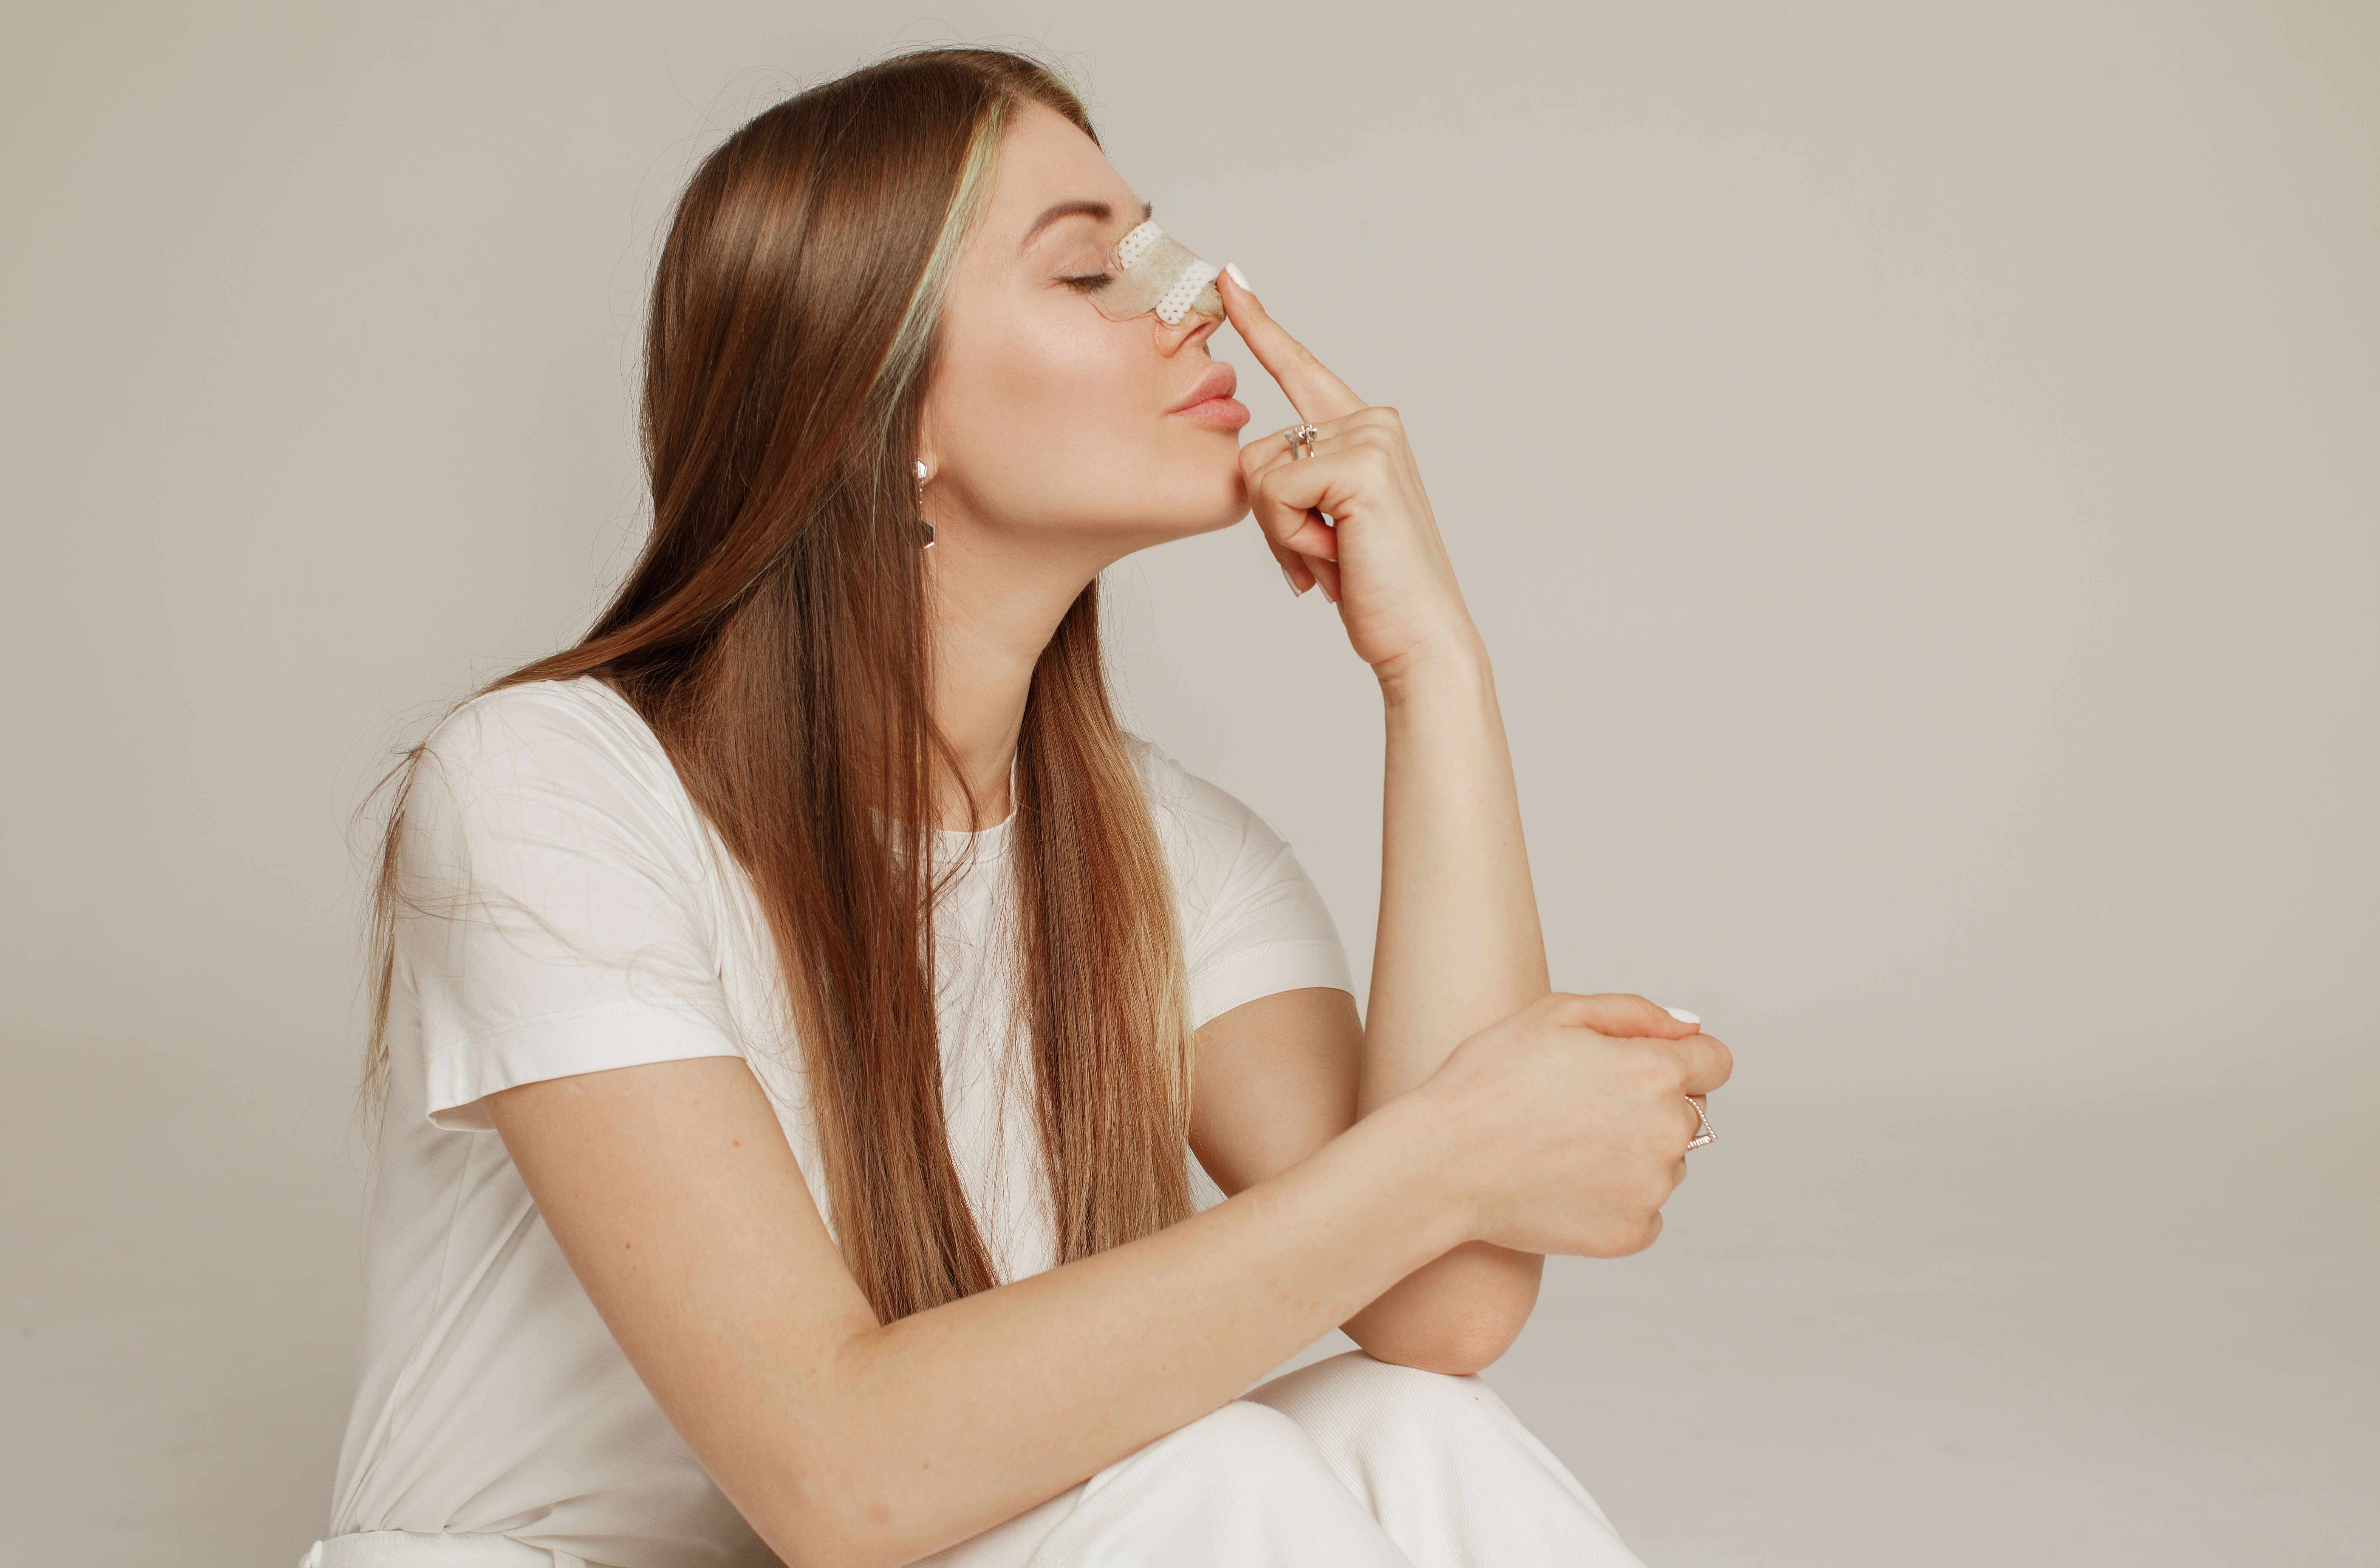 What to Expect For Your Rhinoplasty Surgery